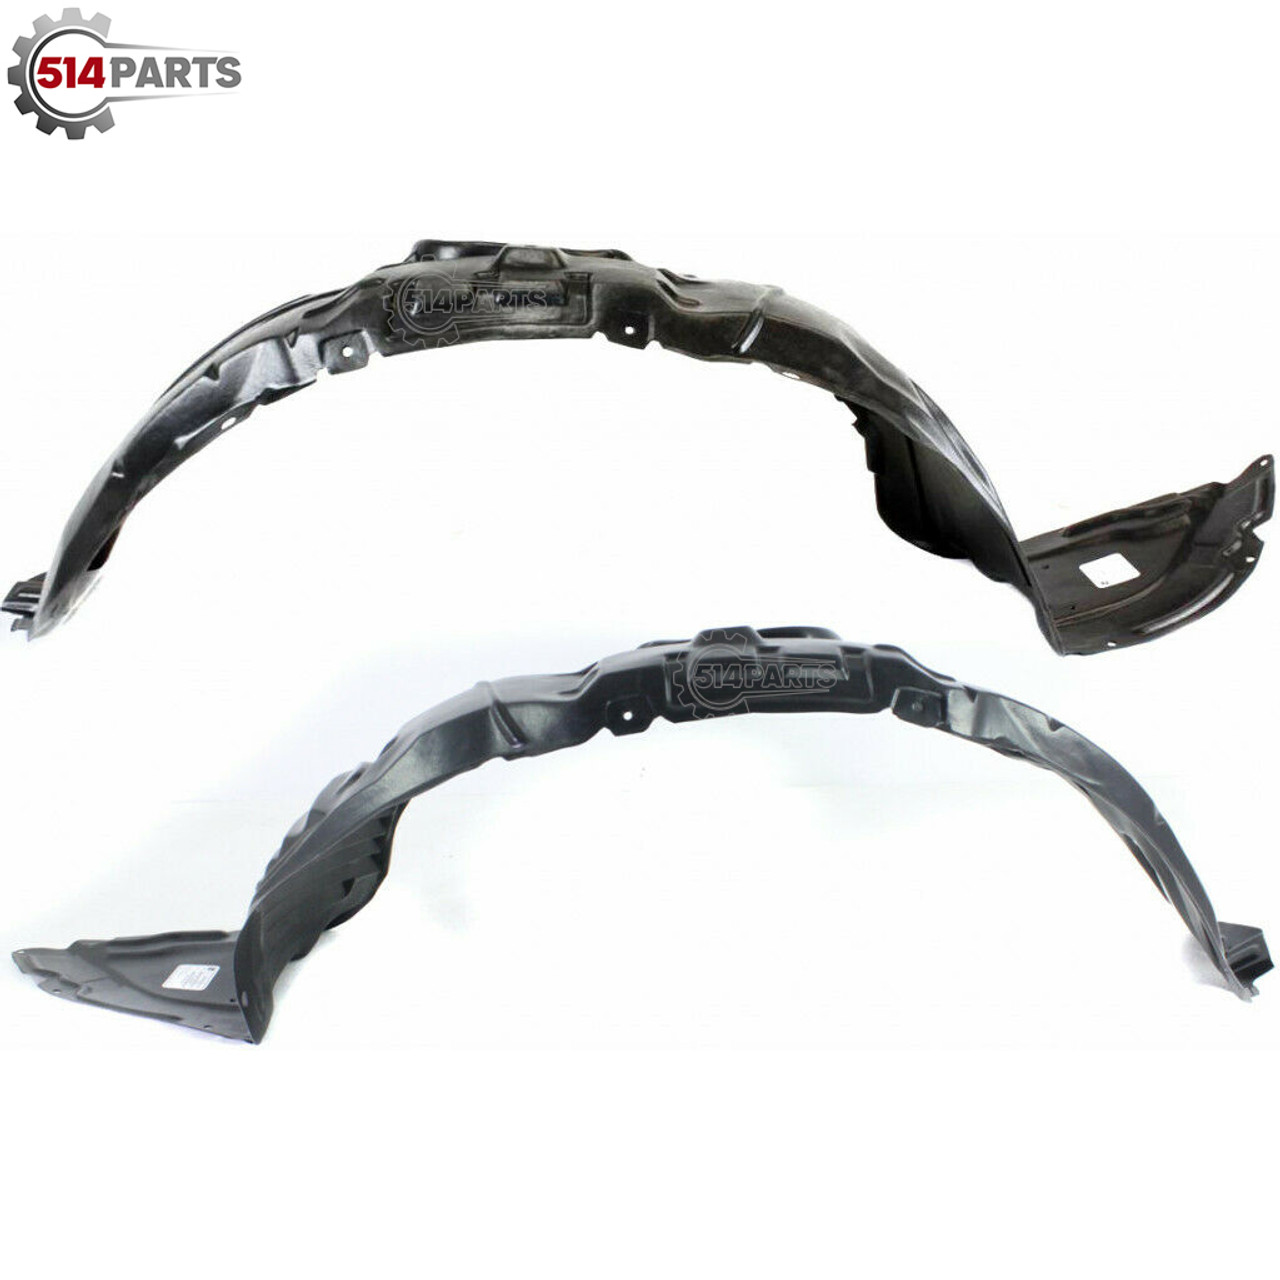 2010 - 2011 MAZDA 3 2.0L and MAZDA 3 SPORT 2.0L FENDER LINER - FAUSSE AILES